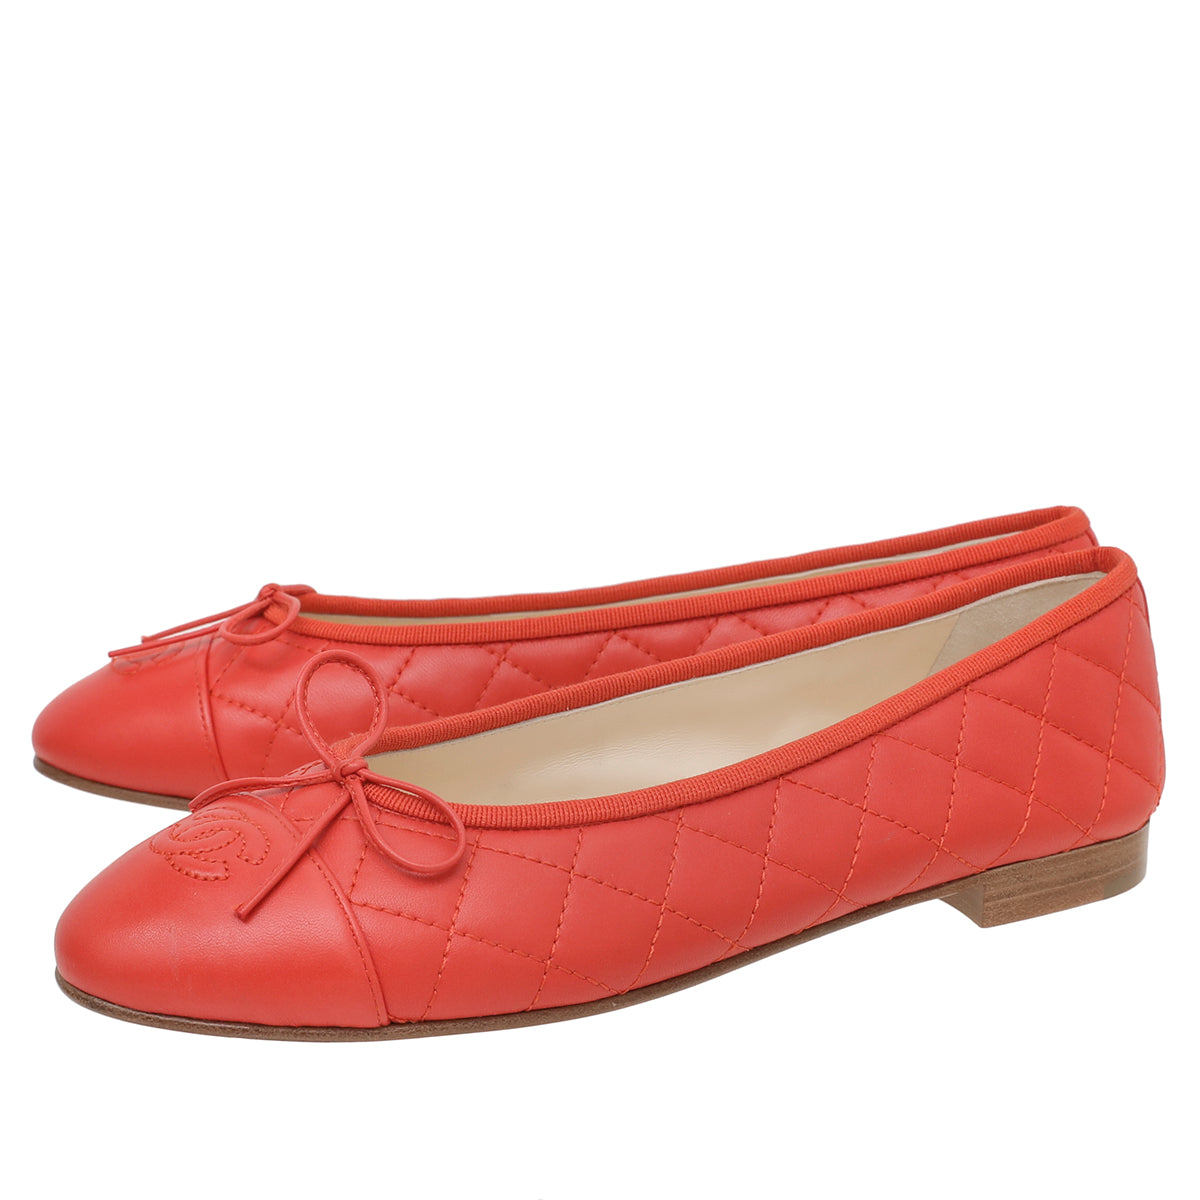 Chanel Coral CC Quilted Cap Toe Bow Ballerina 40